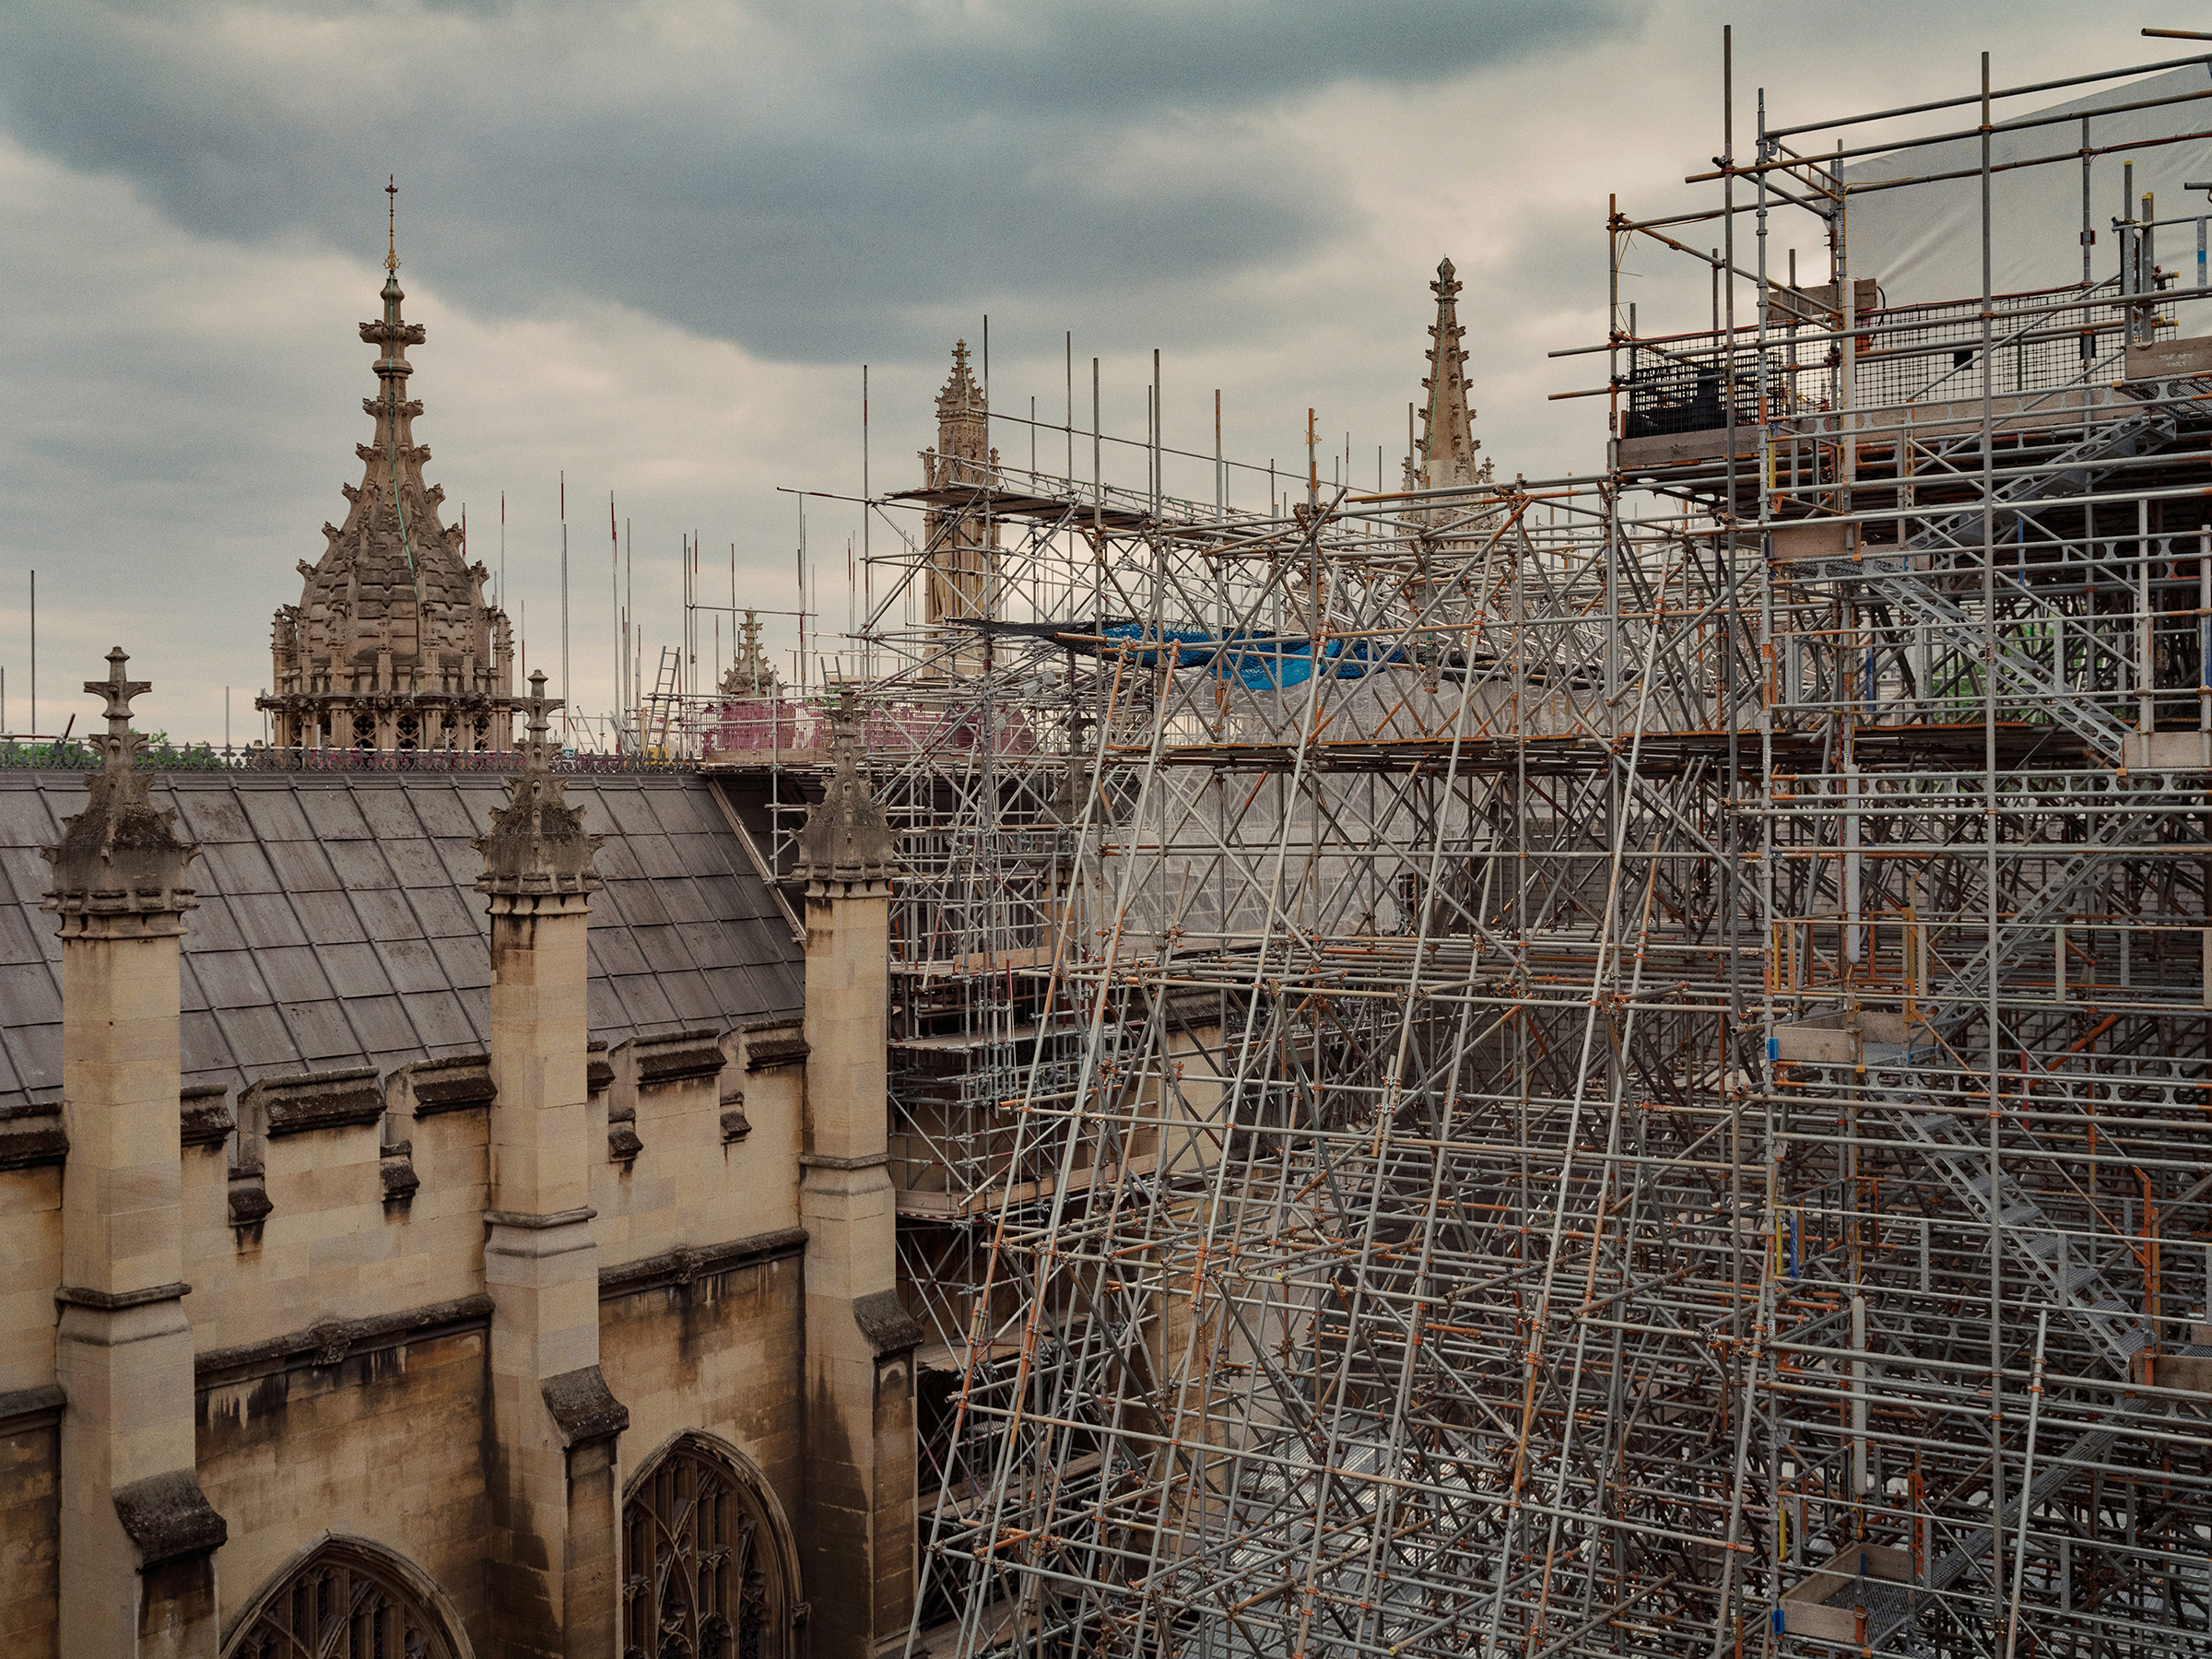 A view from the roof of the Palace of Westminster showing damage to the roof (left) and scaffolding erected for repair work (right). (Ben Quinton for TIME)